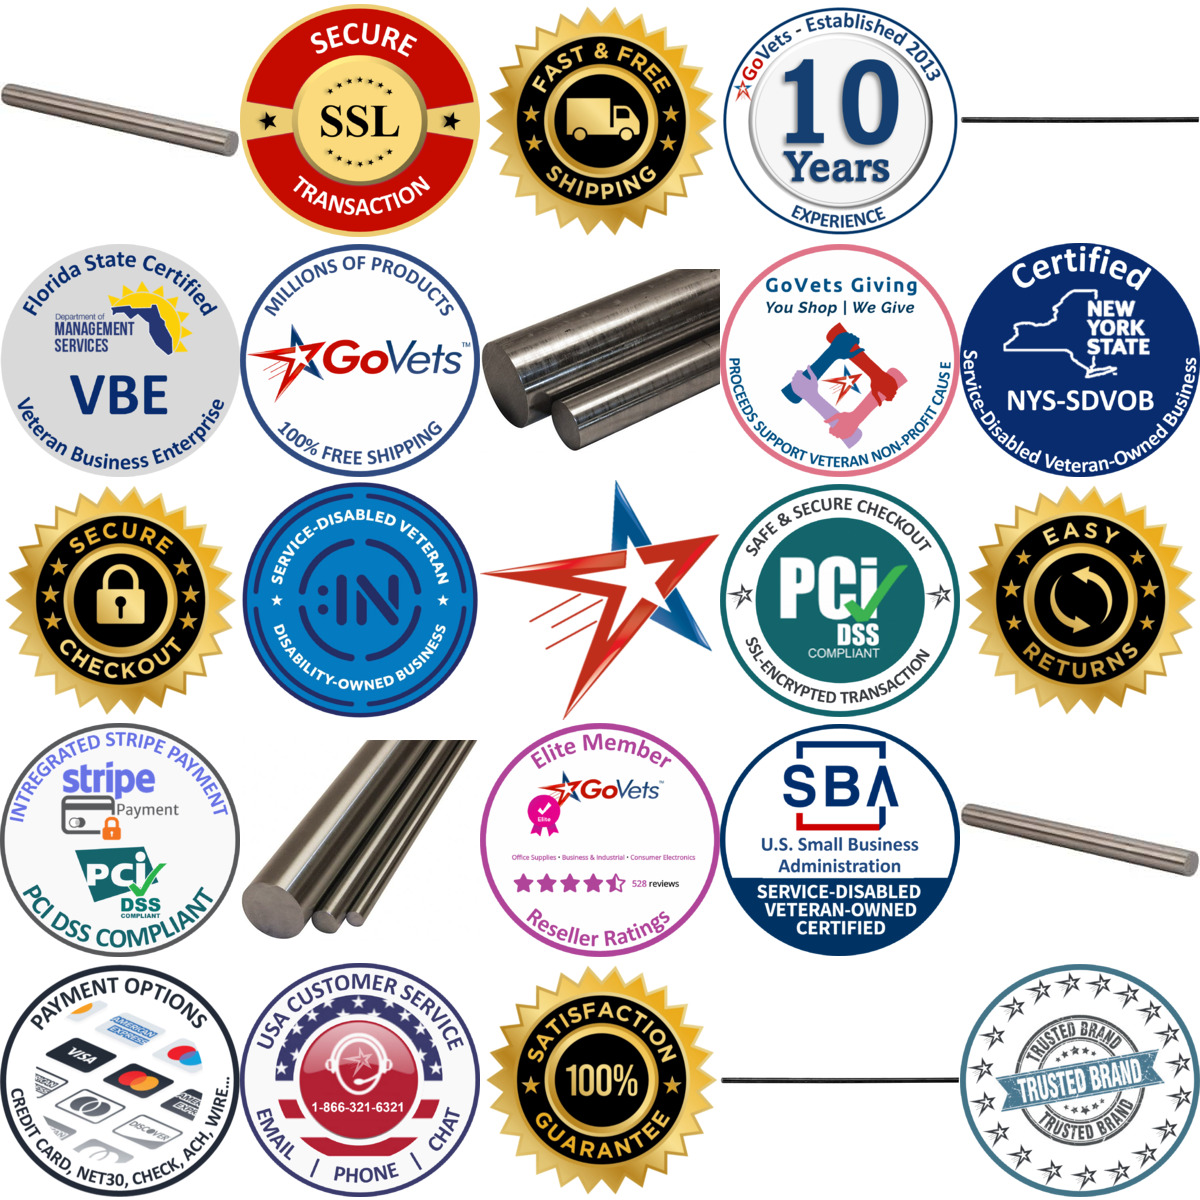 A selection of Stainless Steel Round Rods products on GoVets